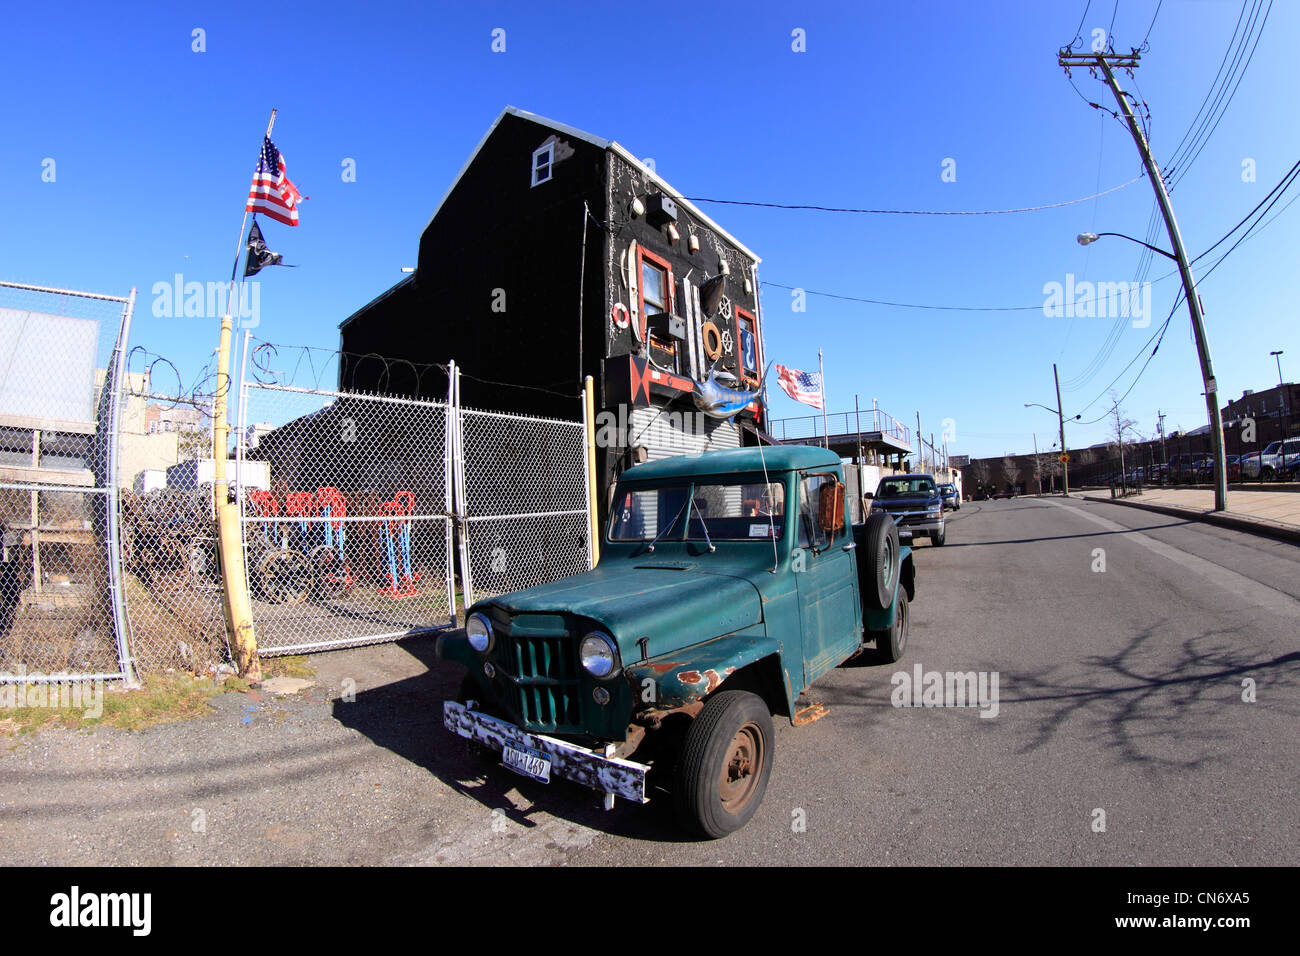 Odd house, garage and old pickup truck Red Hook Brooklyn New York City Stock Photo